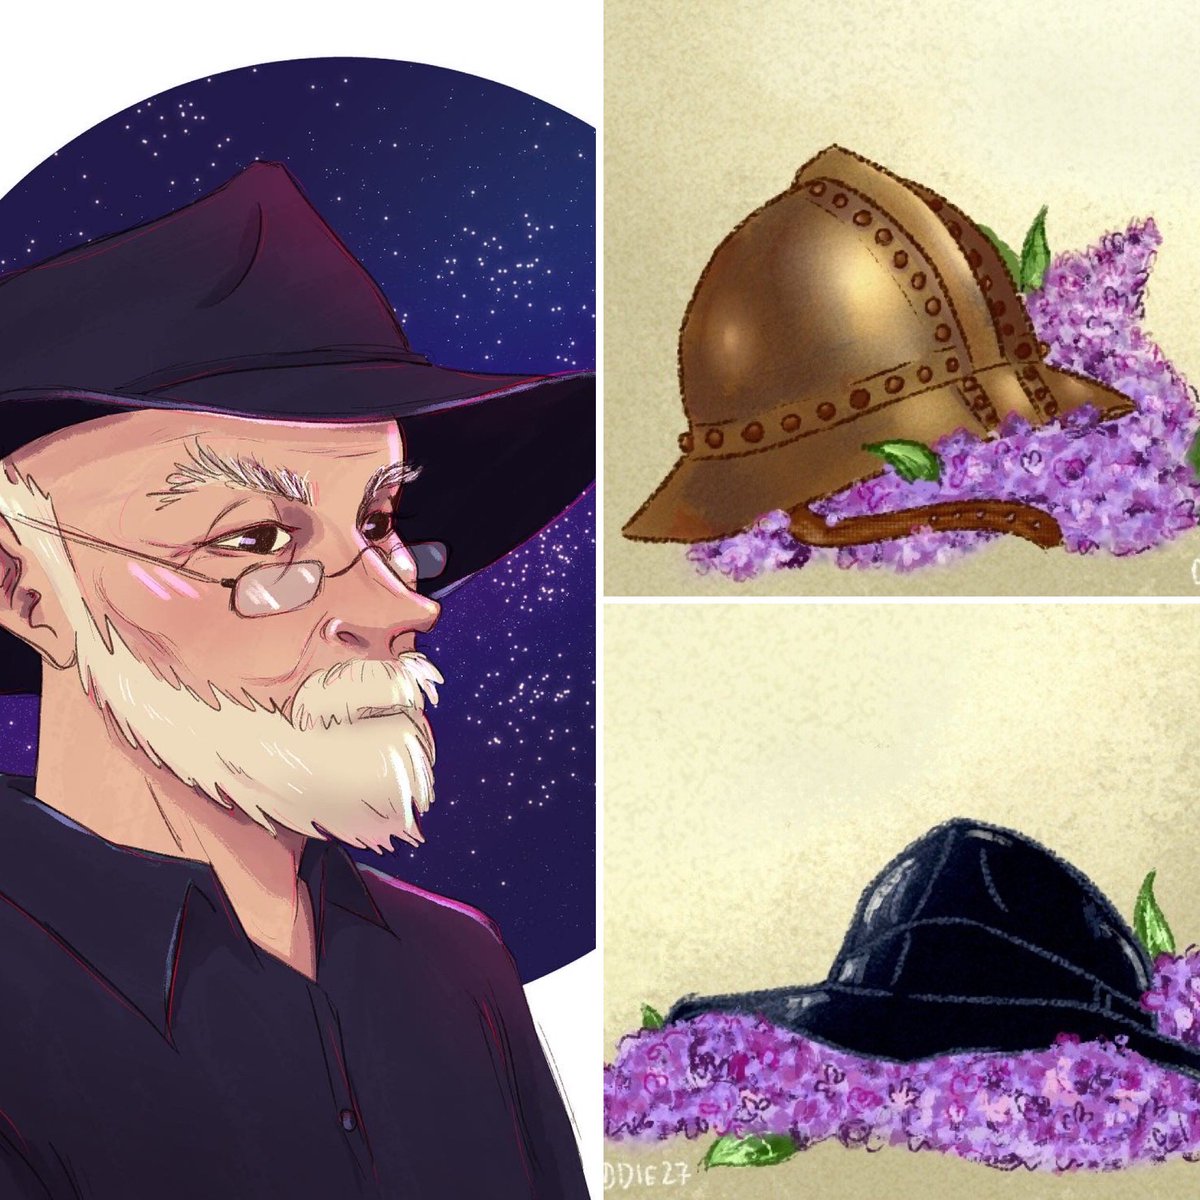 Truth! Justice! Freedom! Reasonably Priced Love! And a Hard-Boiled Egg! #theglorious25thofmay #gnuterrypratchett #discworld #terrypratchett